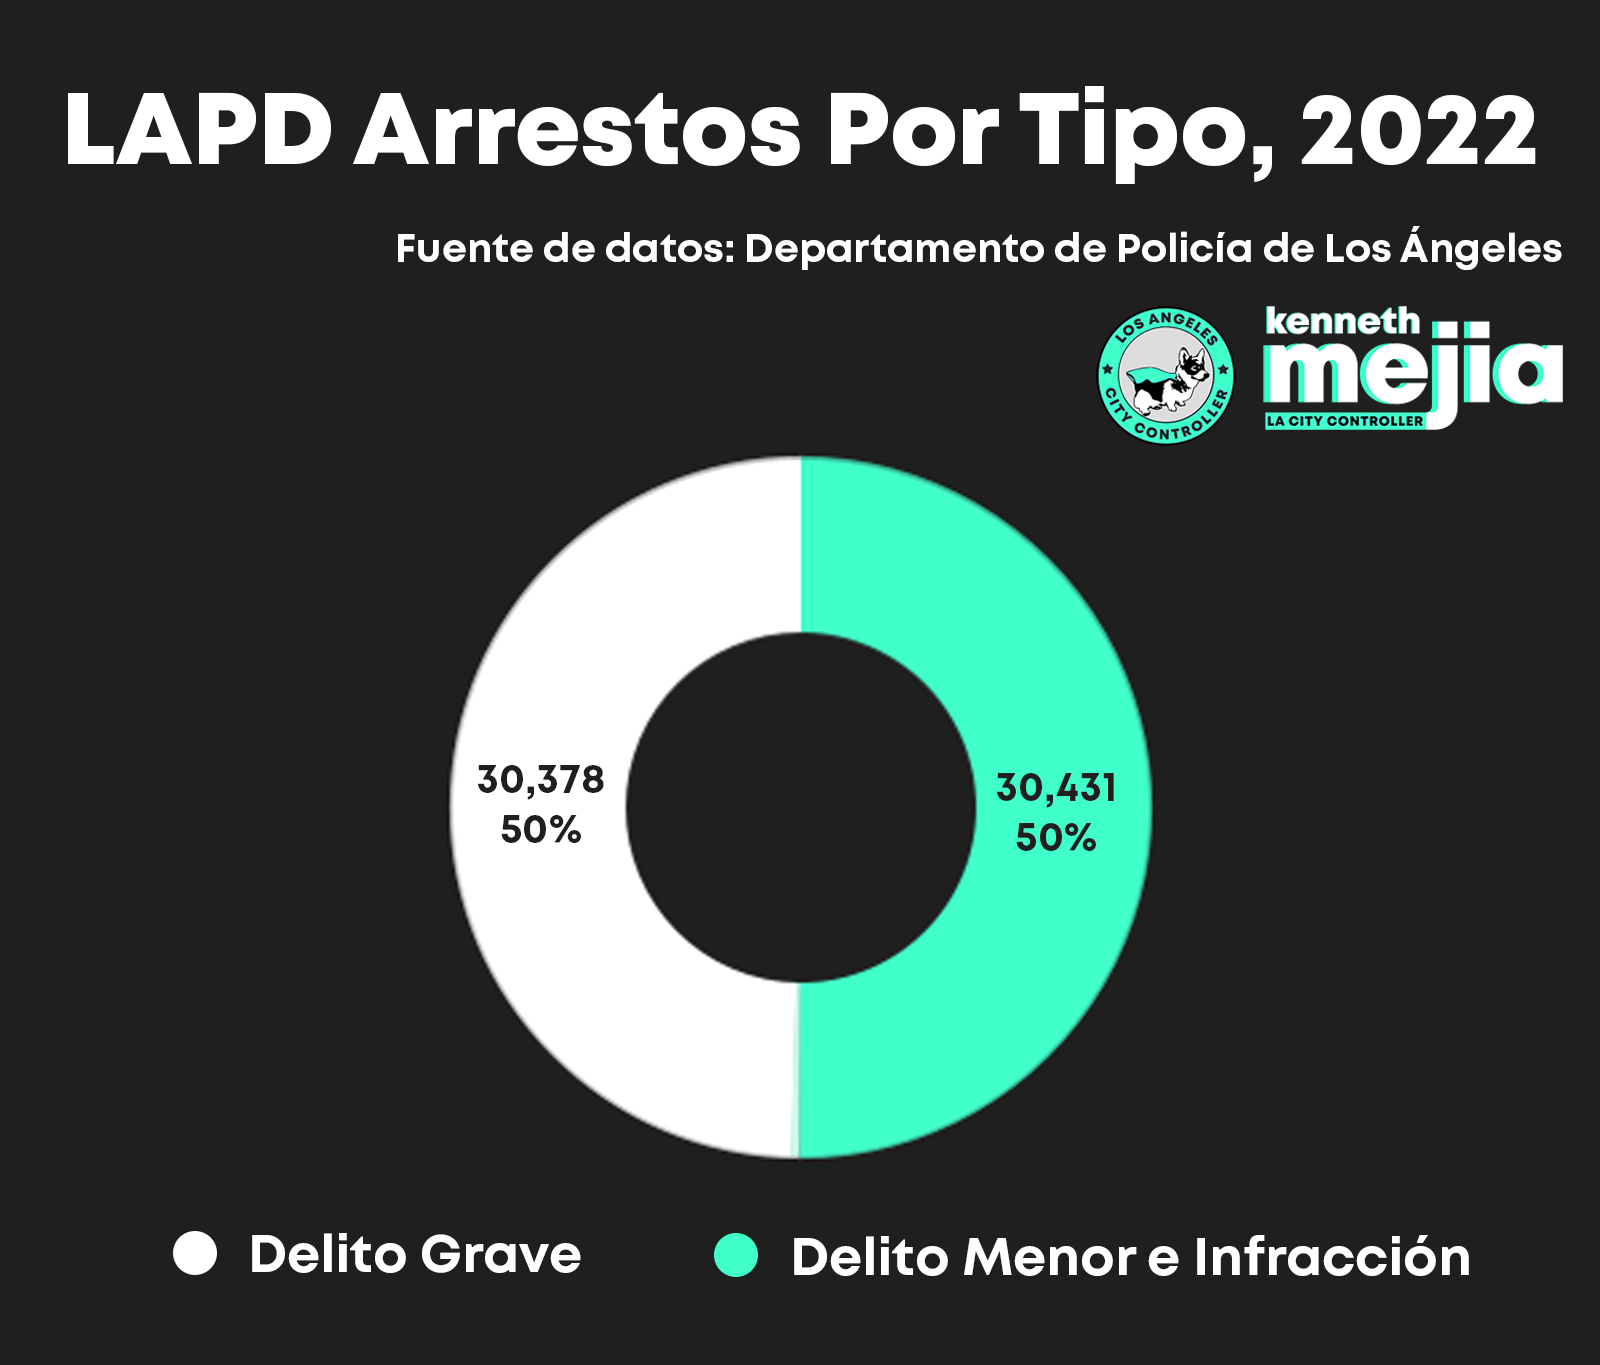 A bar chart of LAPD Arrests by Council District, 2022. There are still fewer arrests overall compared to 2019. There are 15 Council Districts. Council Districts 14, 8, and 1 have the highest number of arrests, at around 5,000 to 6,000  arrests,  and are also fairly close in number of arrests to districts 6, 9,  11, and 13 which are also close to 5,000 arrests. The rest of the Council Districts havemuch fewer than 5,000  arrests. CDs 4 and 5 have the fewest number of arrests, at under 2,500 arrests each. Source of data is LAPD. 